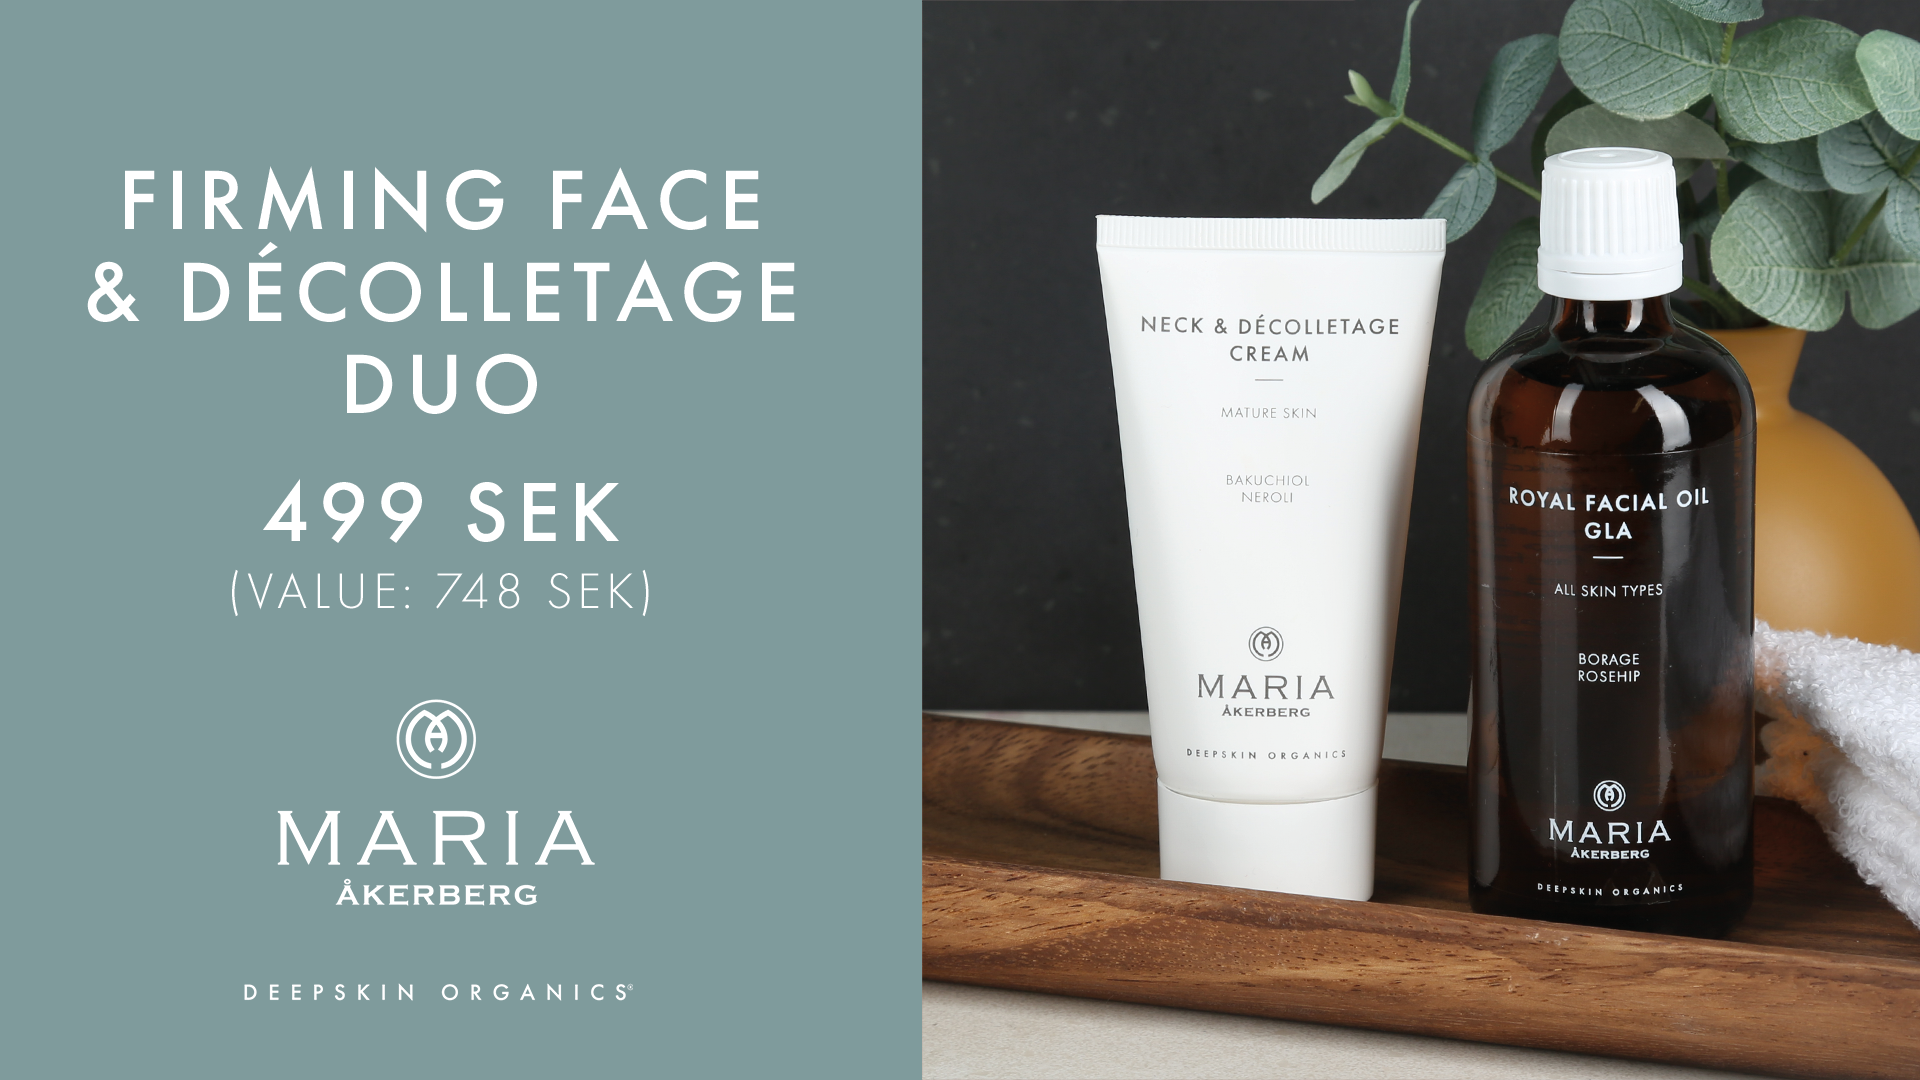 Firming Face & Decolletage Duo